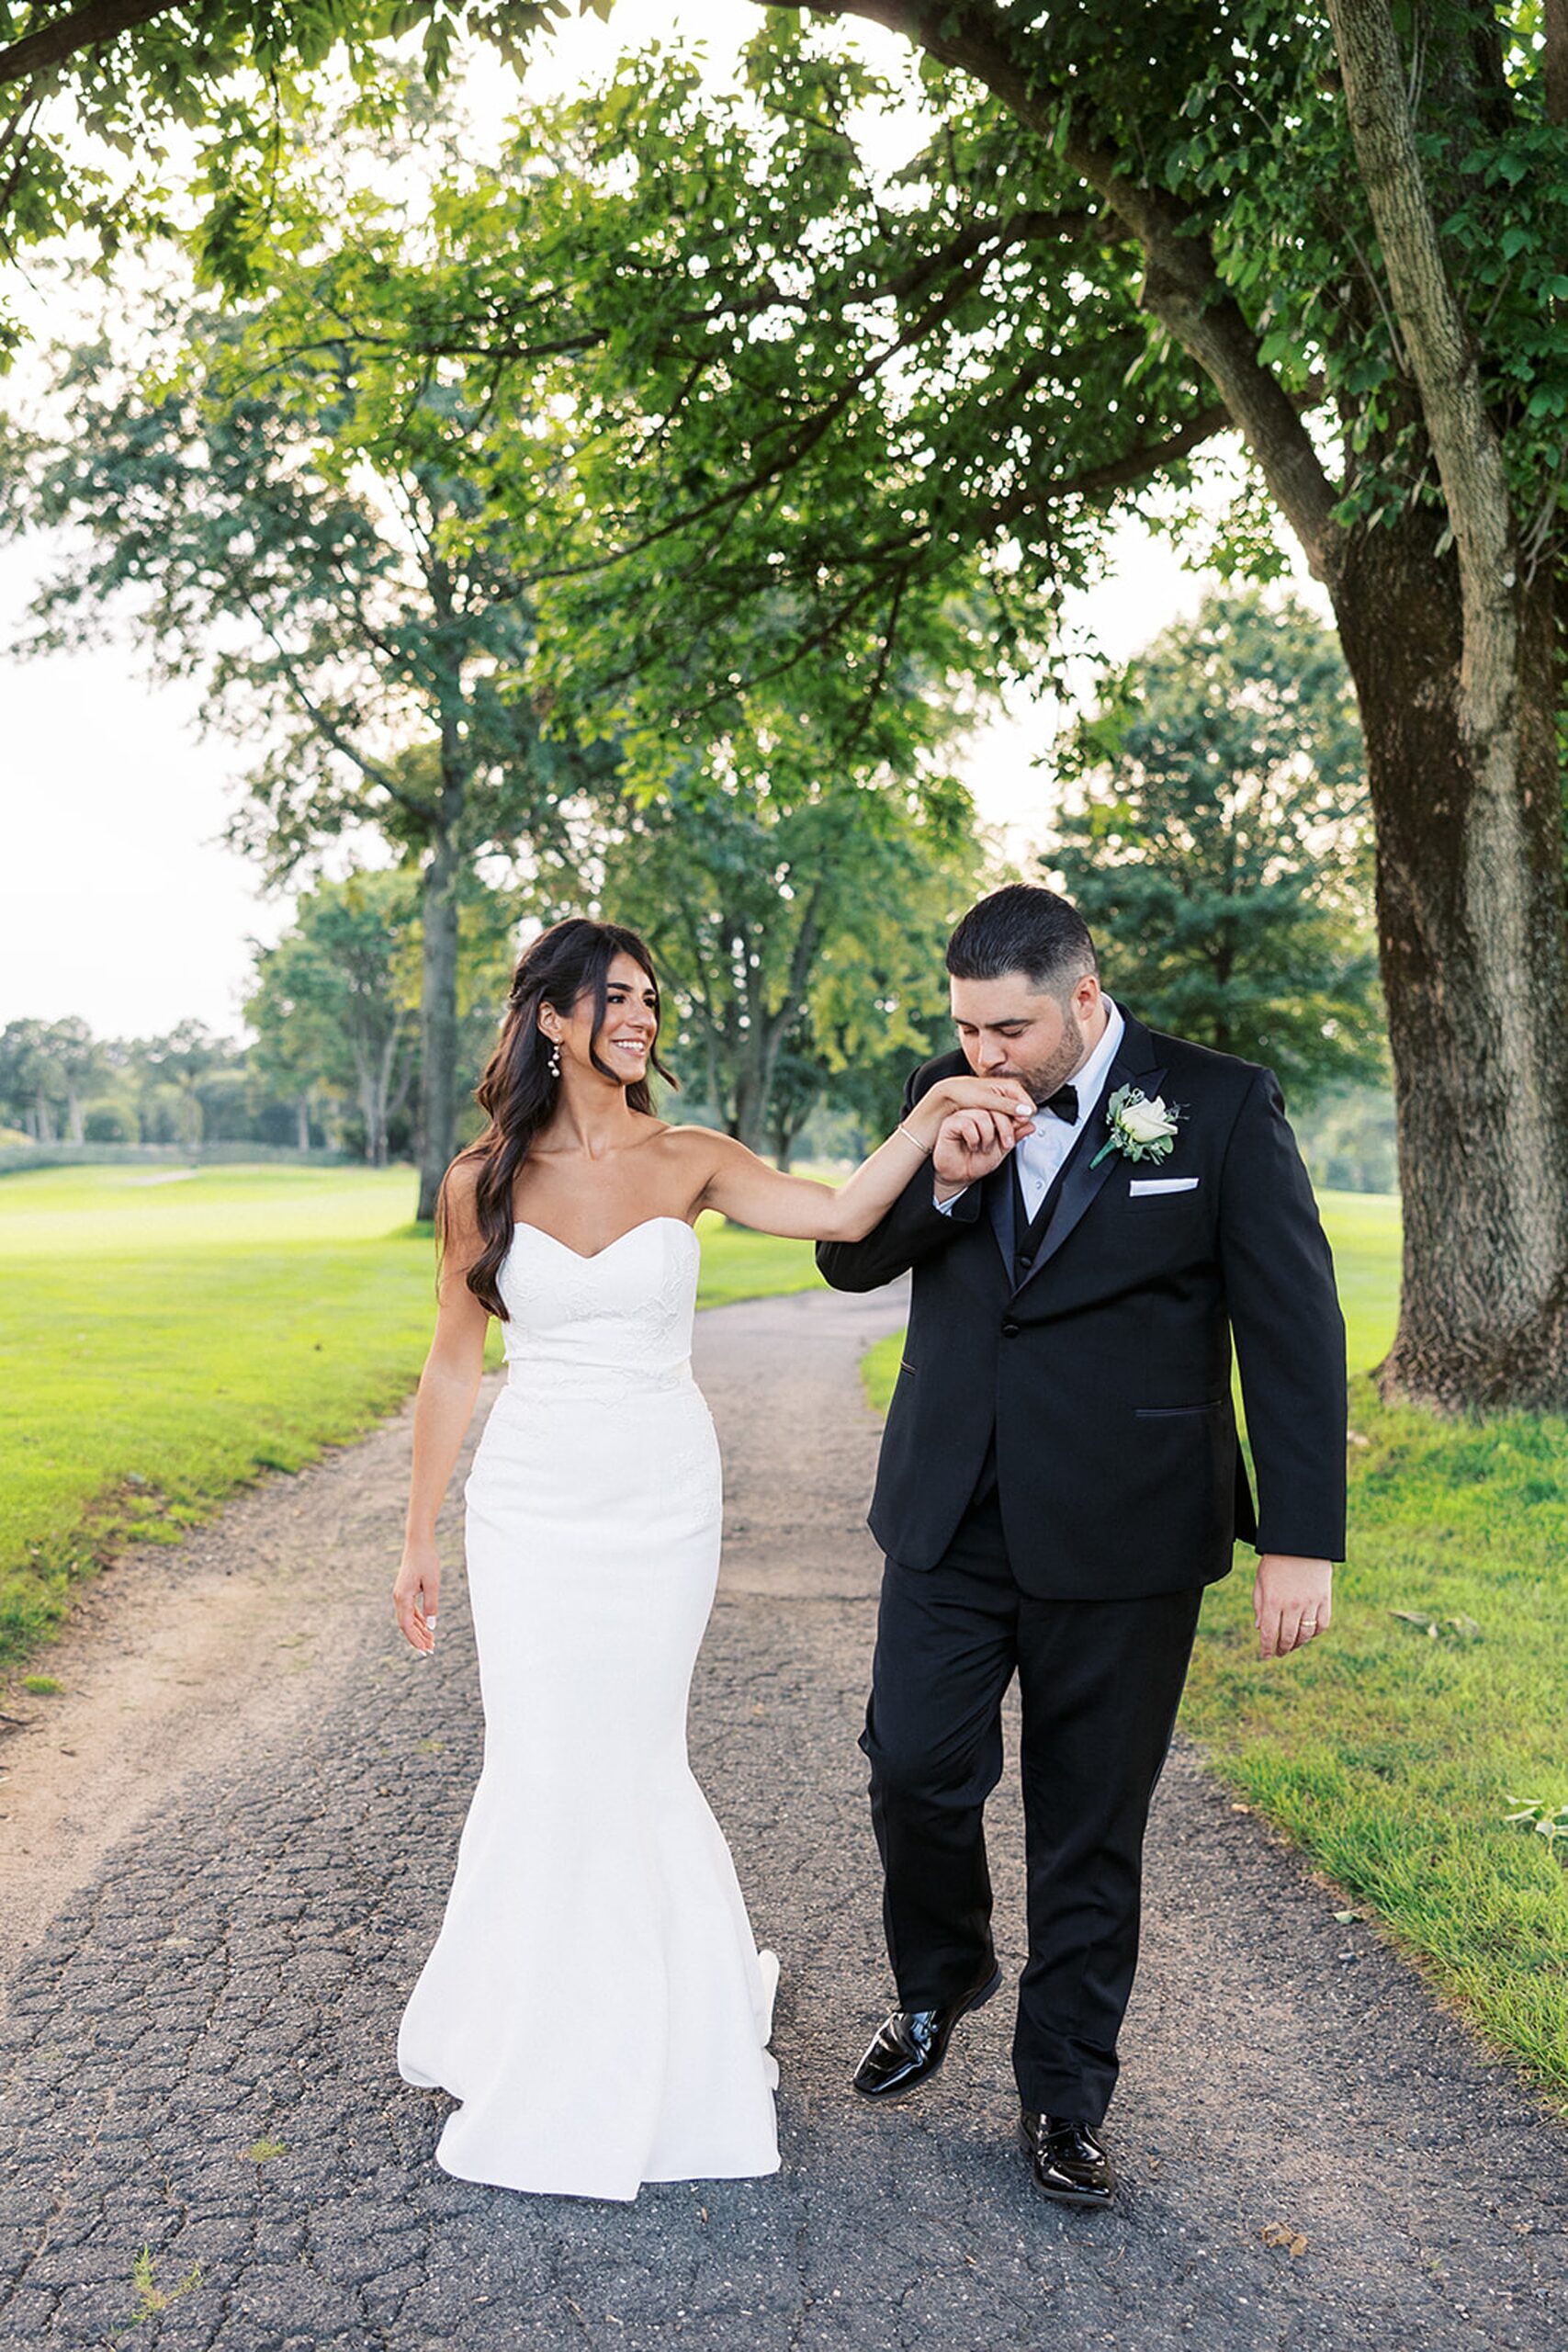 A groom kisses his bride's hand while they walk down a paved sidewalk under a large oak tree at an edgewood country club wedding